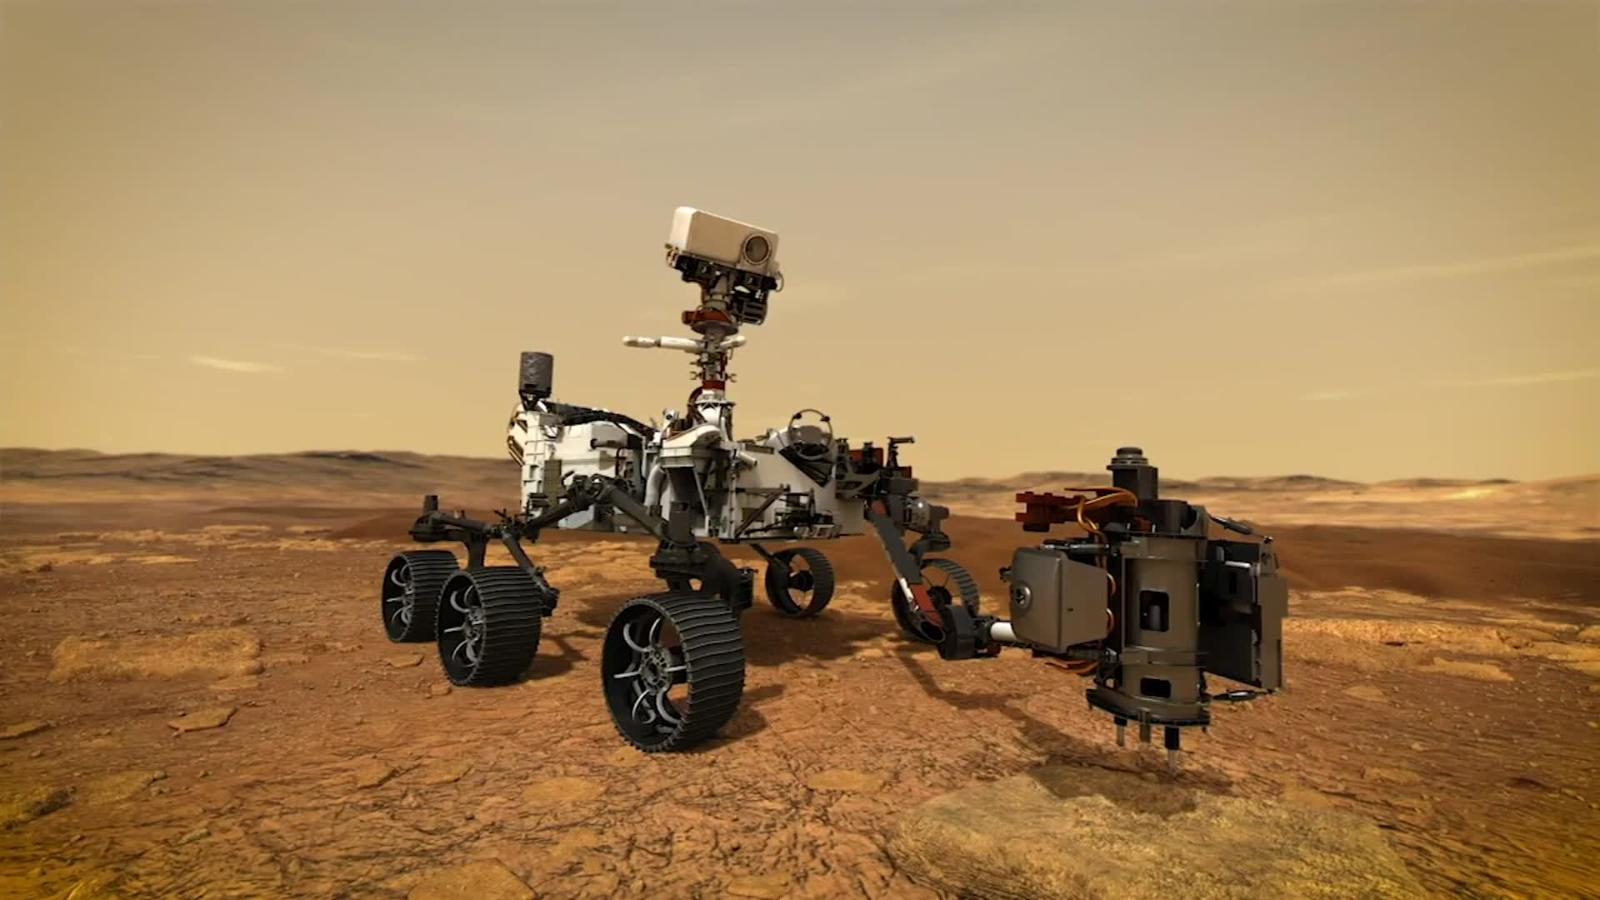   This is how NASA collects samples on Mars  Video

